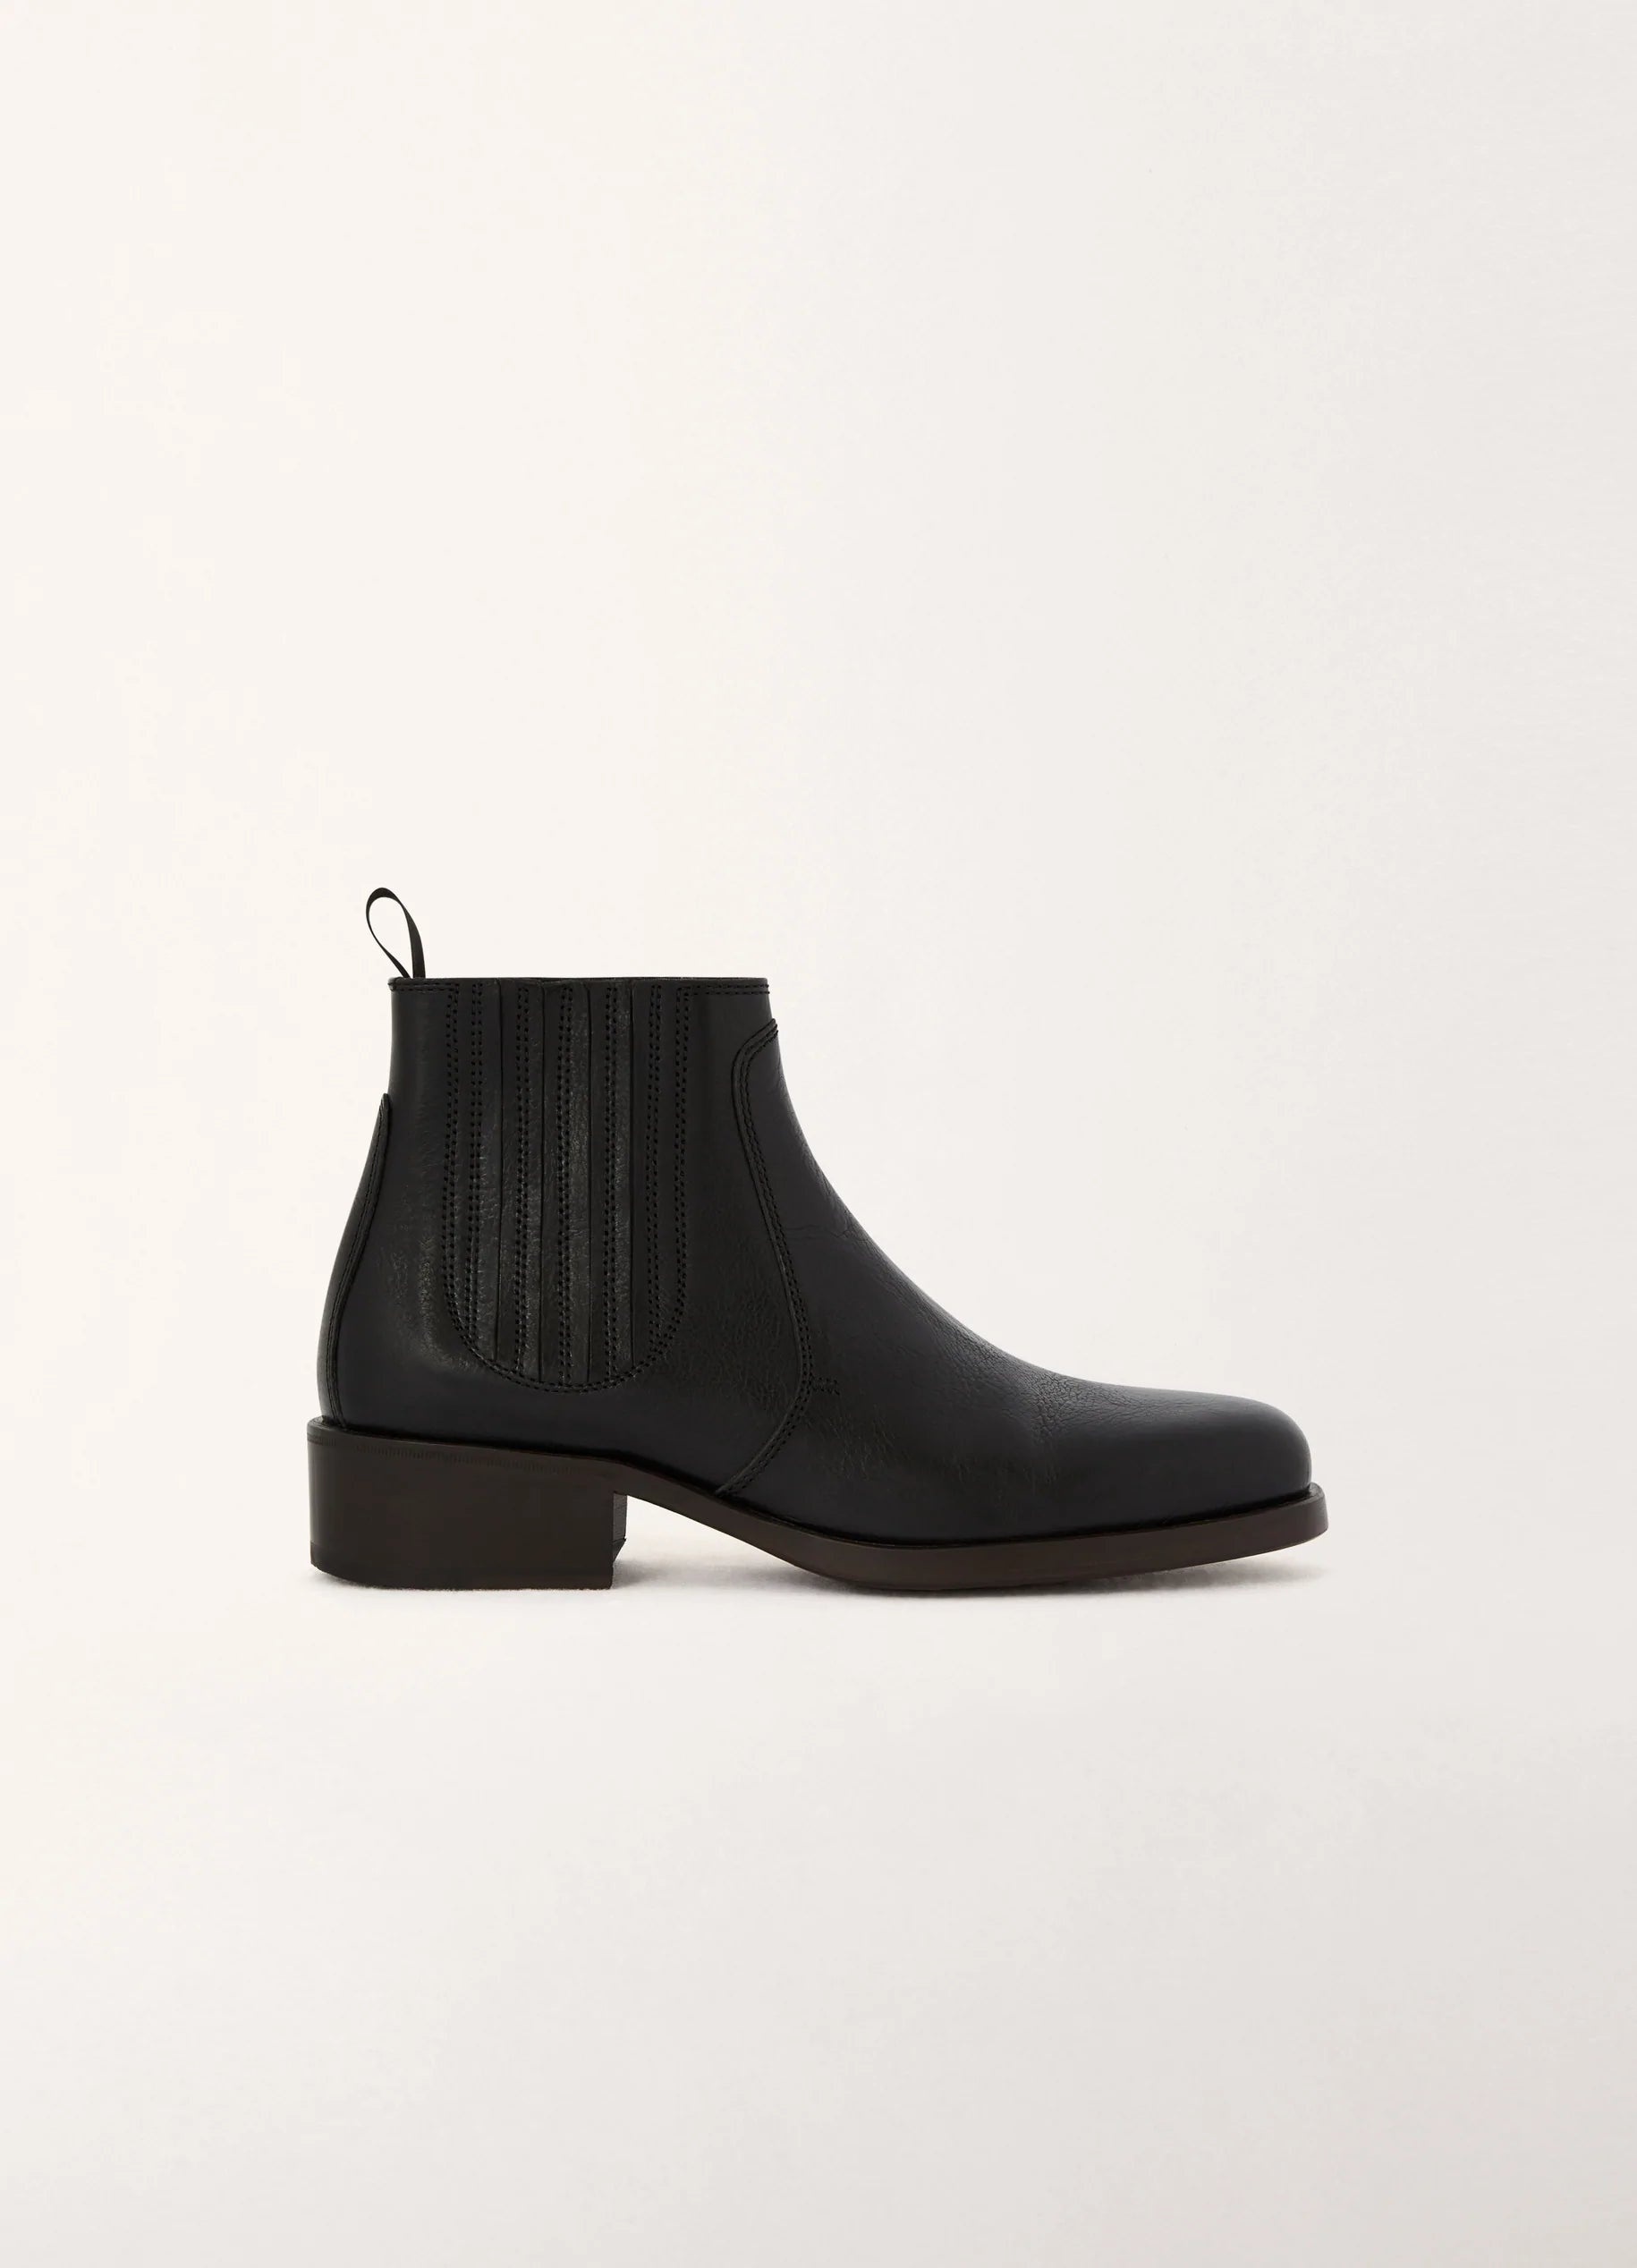 CHELSEA BOOTS
SOFT VEGETABLE - 1